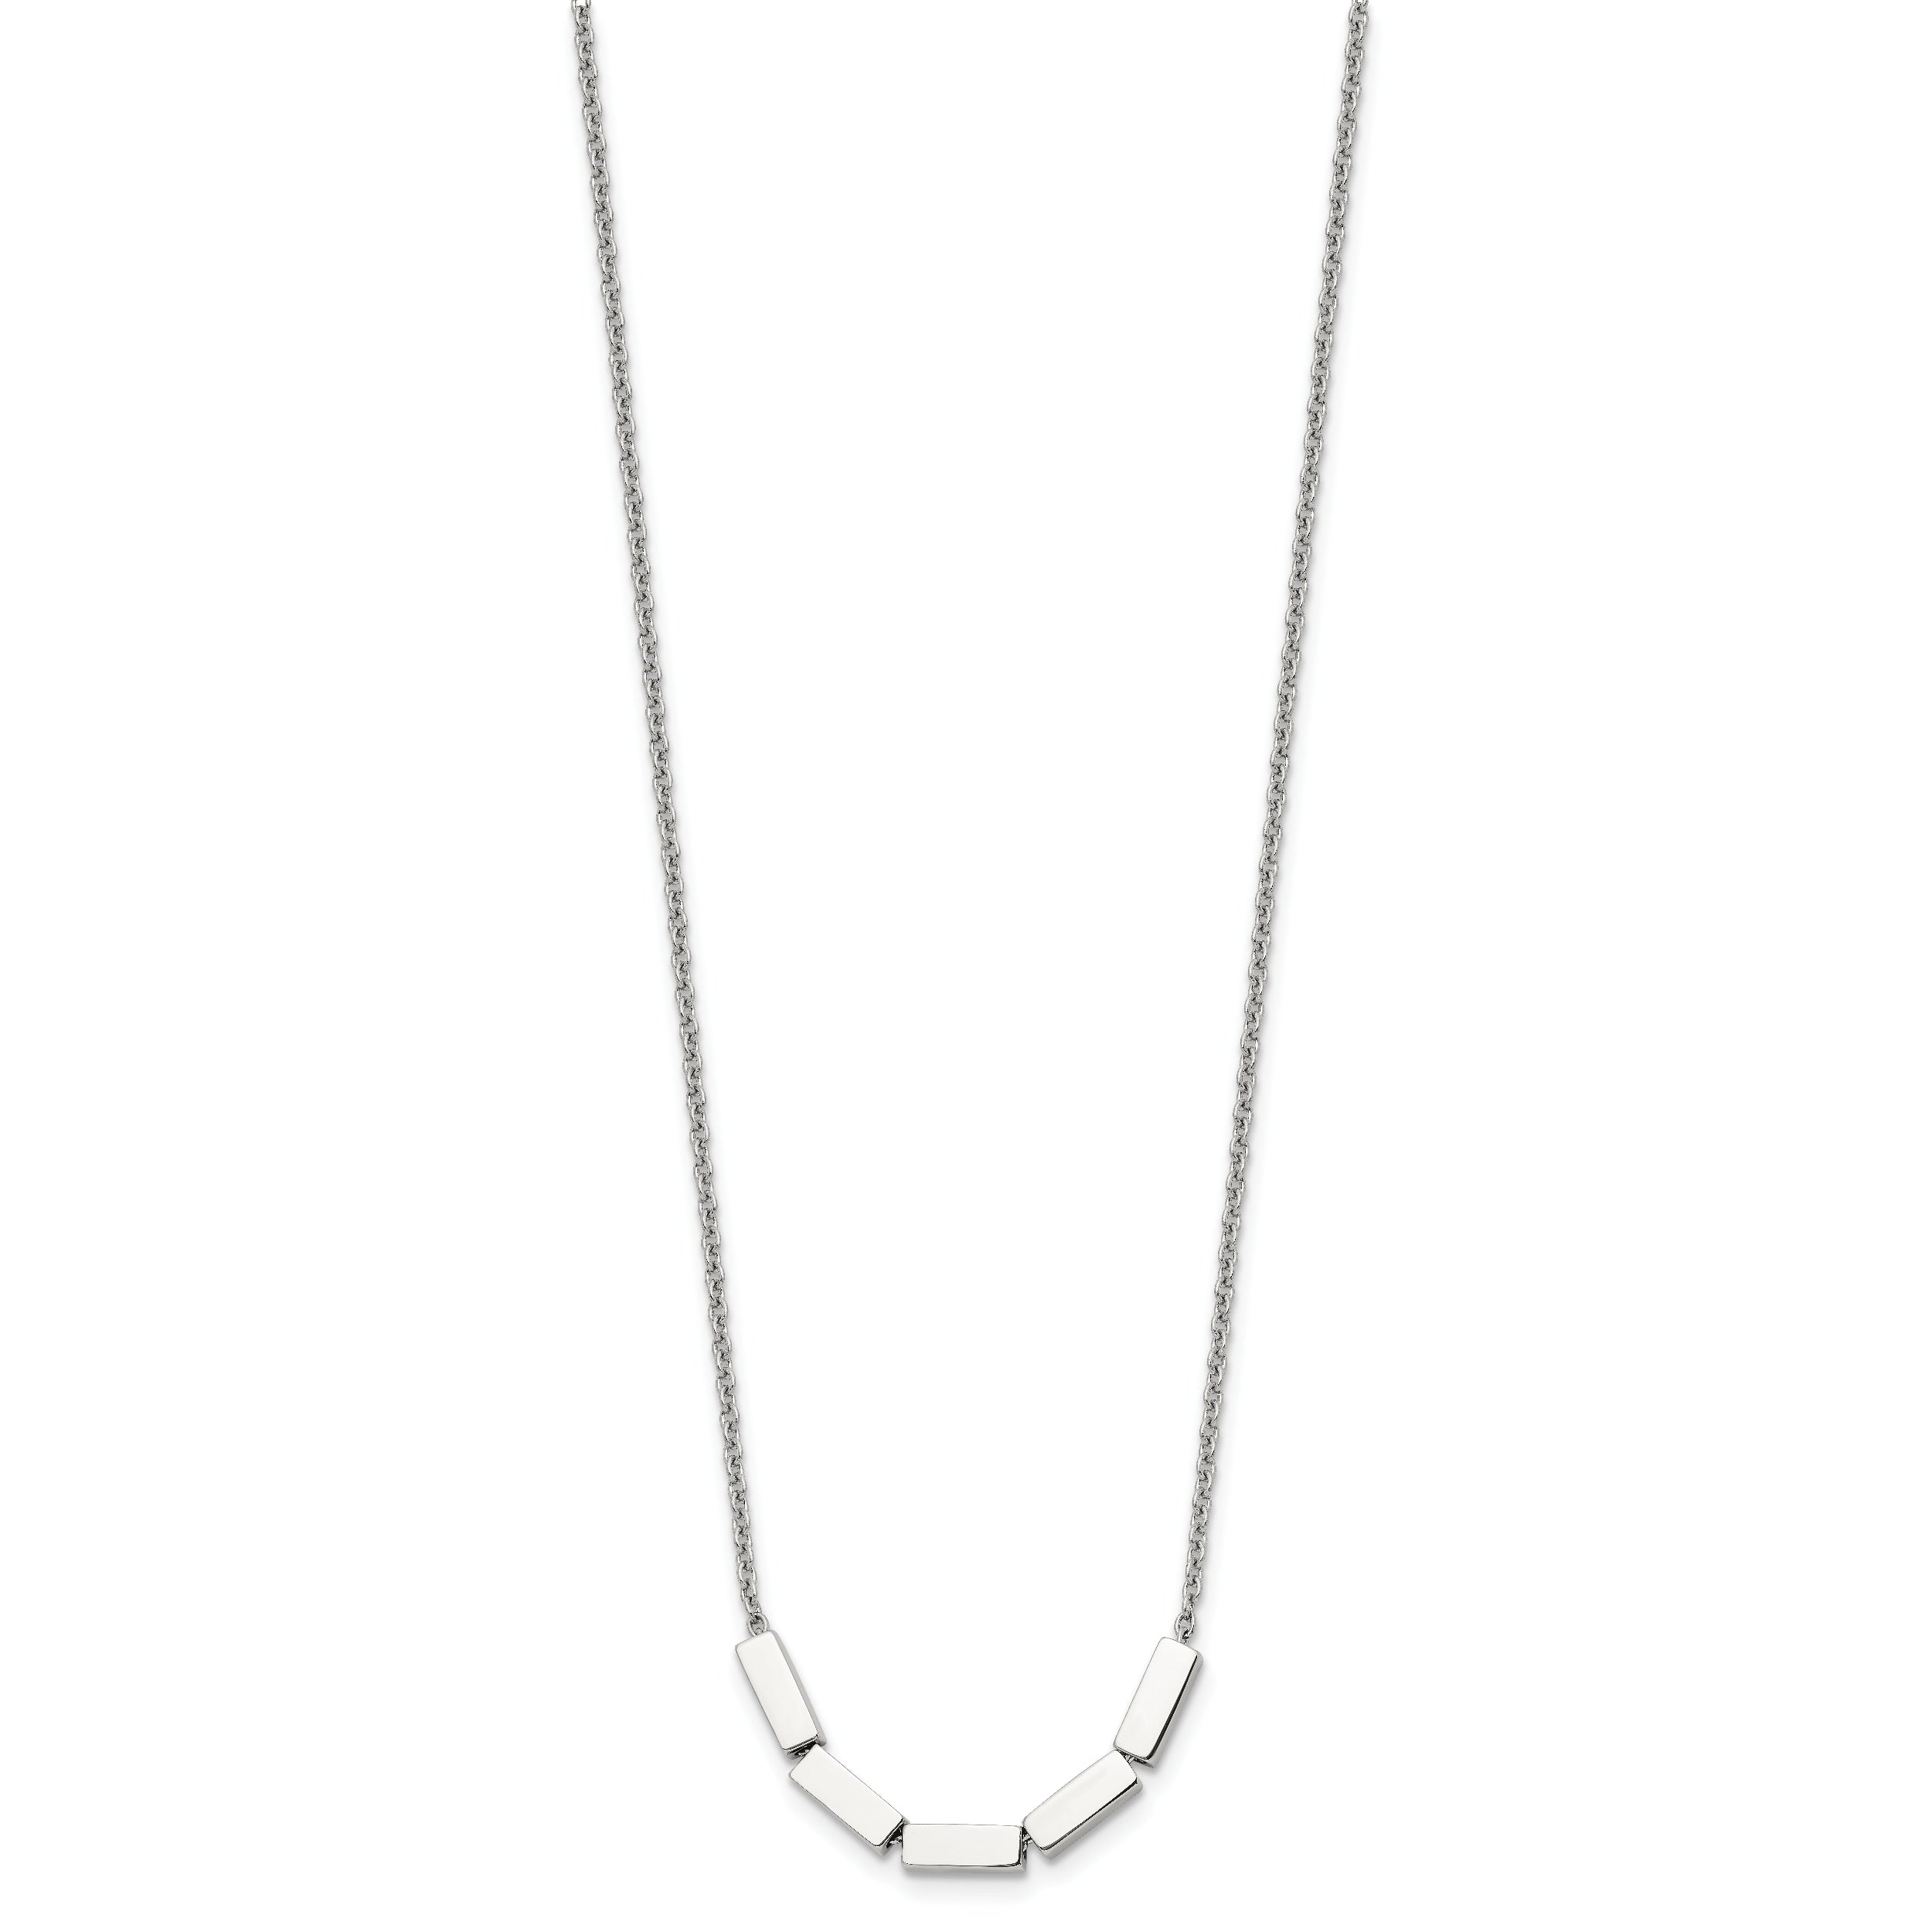 Chisel Stainless Steel Polished Rectangle Beads on a 16.5 inch Cable Chain with a 2 inch Extension Necklace